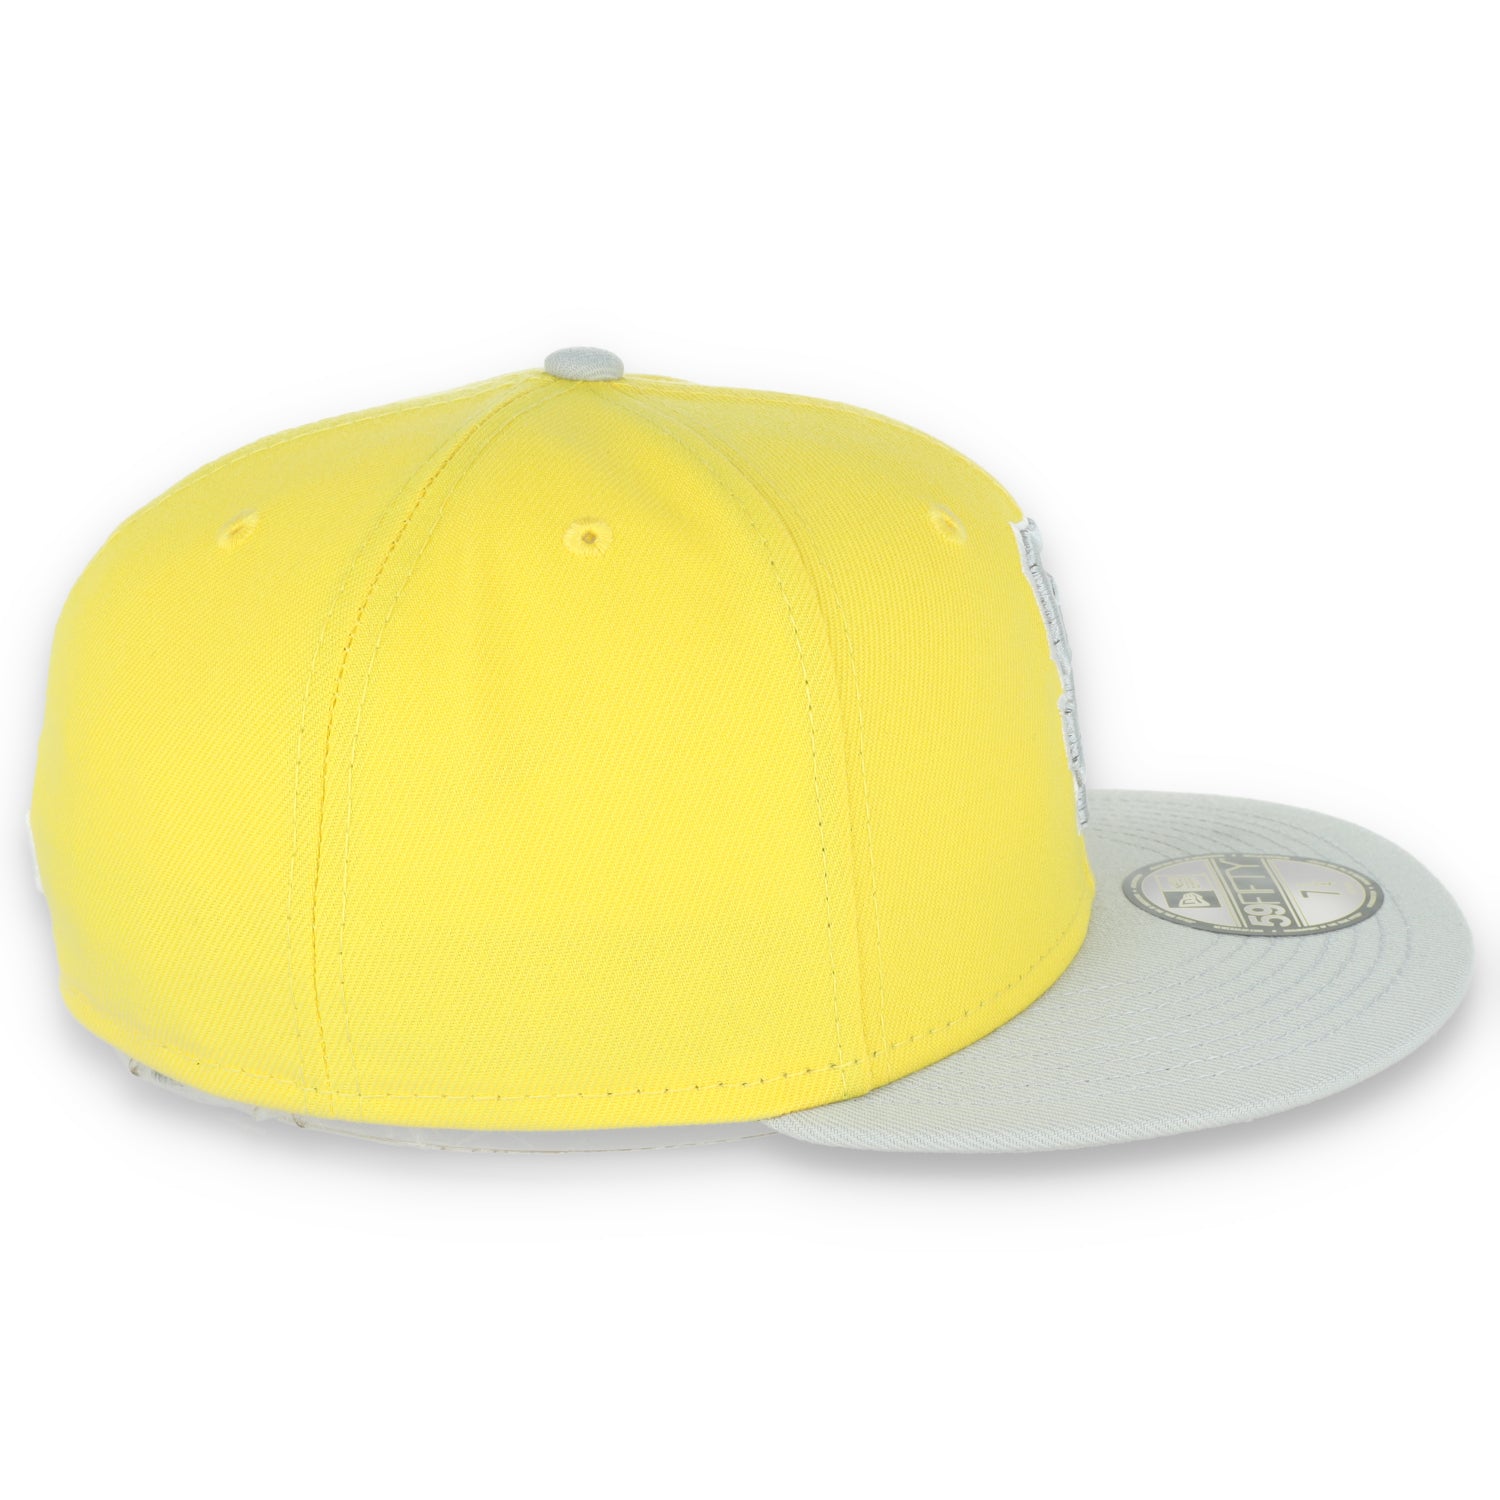 NEW ERA SAN FRANCISCO GIANTS 59FIFTY COLOR PACK-YELLOW/GREY